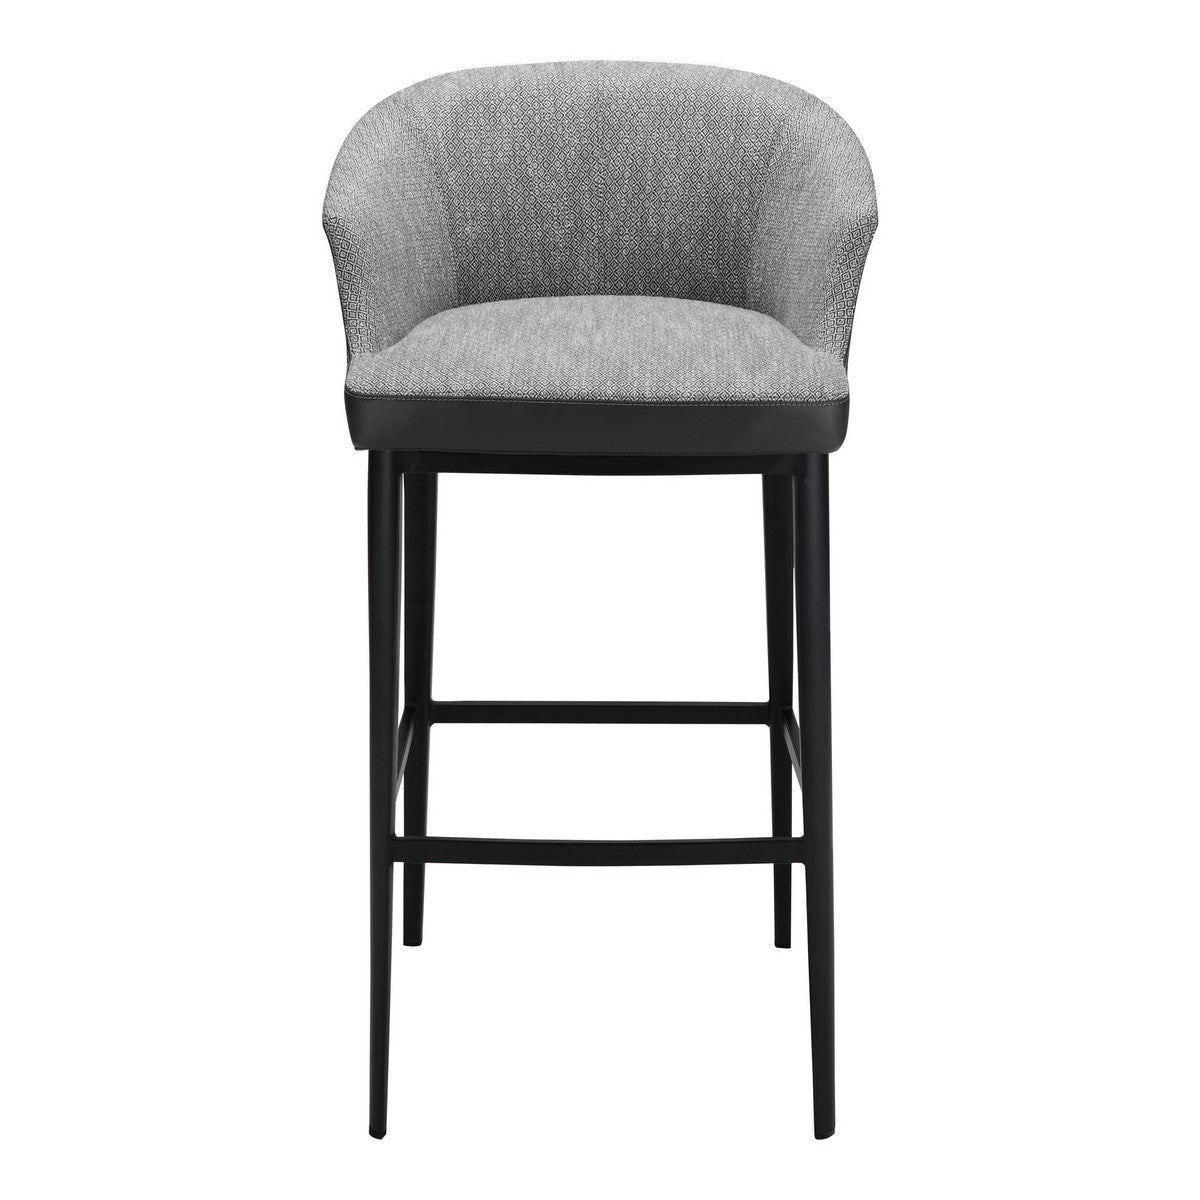 Moe's Home Collection Beckett Barstool Grey - EJ-1029-15 - Moe's Home Collection - Bar Stools - Minimal And Modern - 1